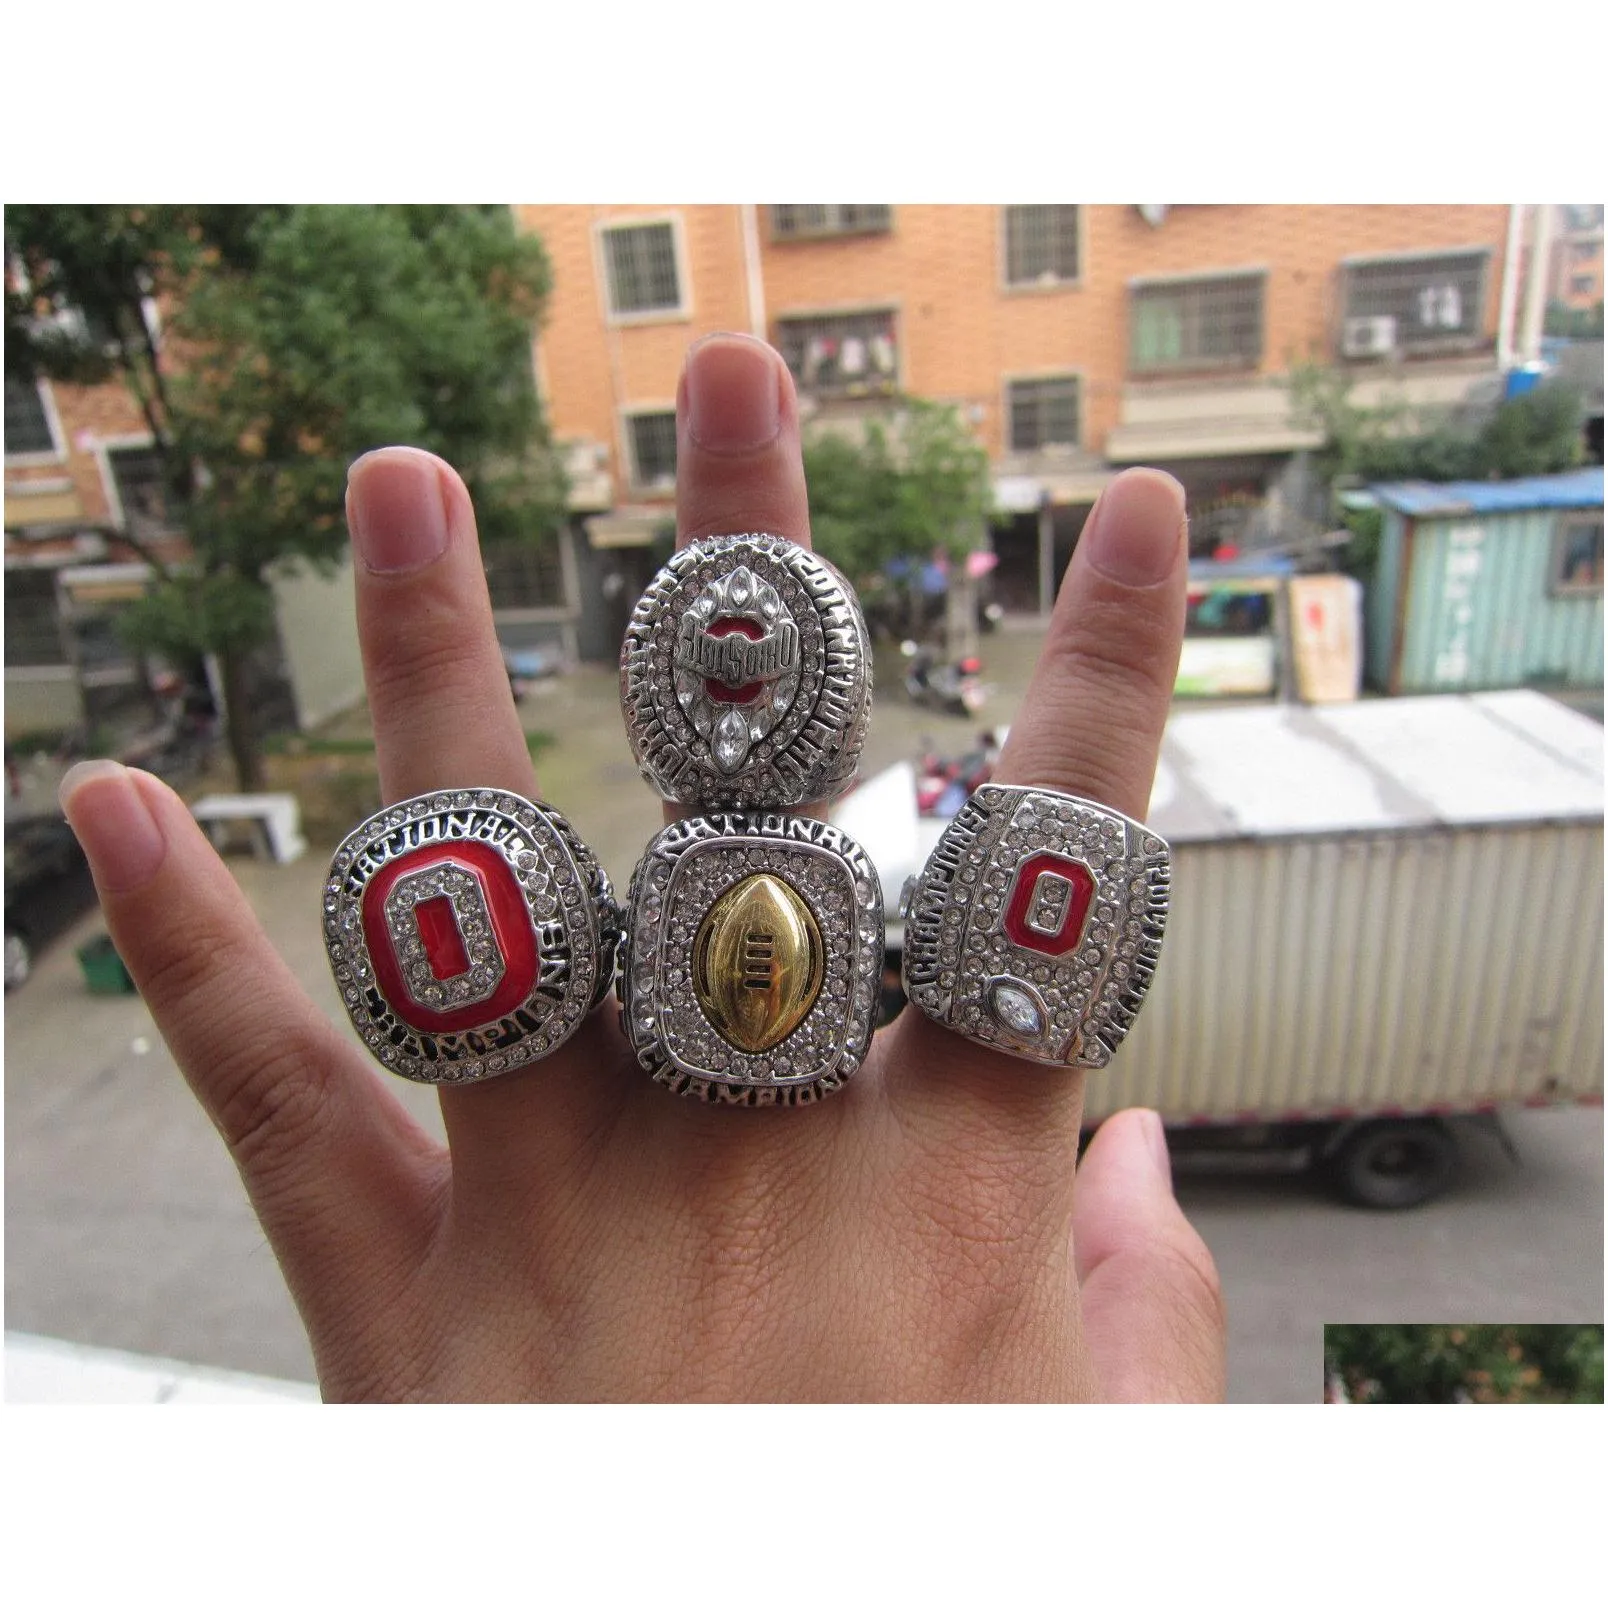 Cluster Rings Ohio State 4Pcs Football National Championship Ring With Wooden Display Box Souvenir Men Fan Gift Wholesale Drop Drop De Dhmgo